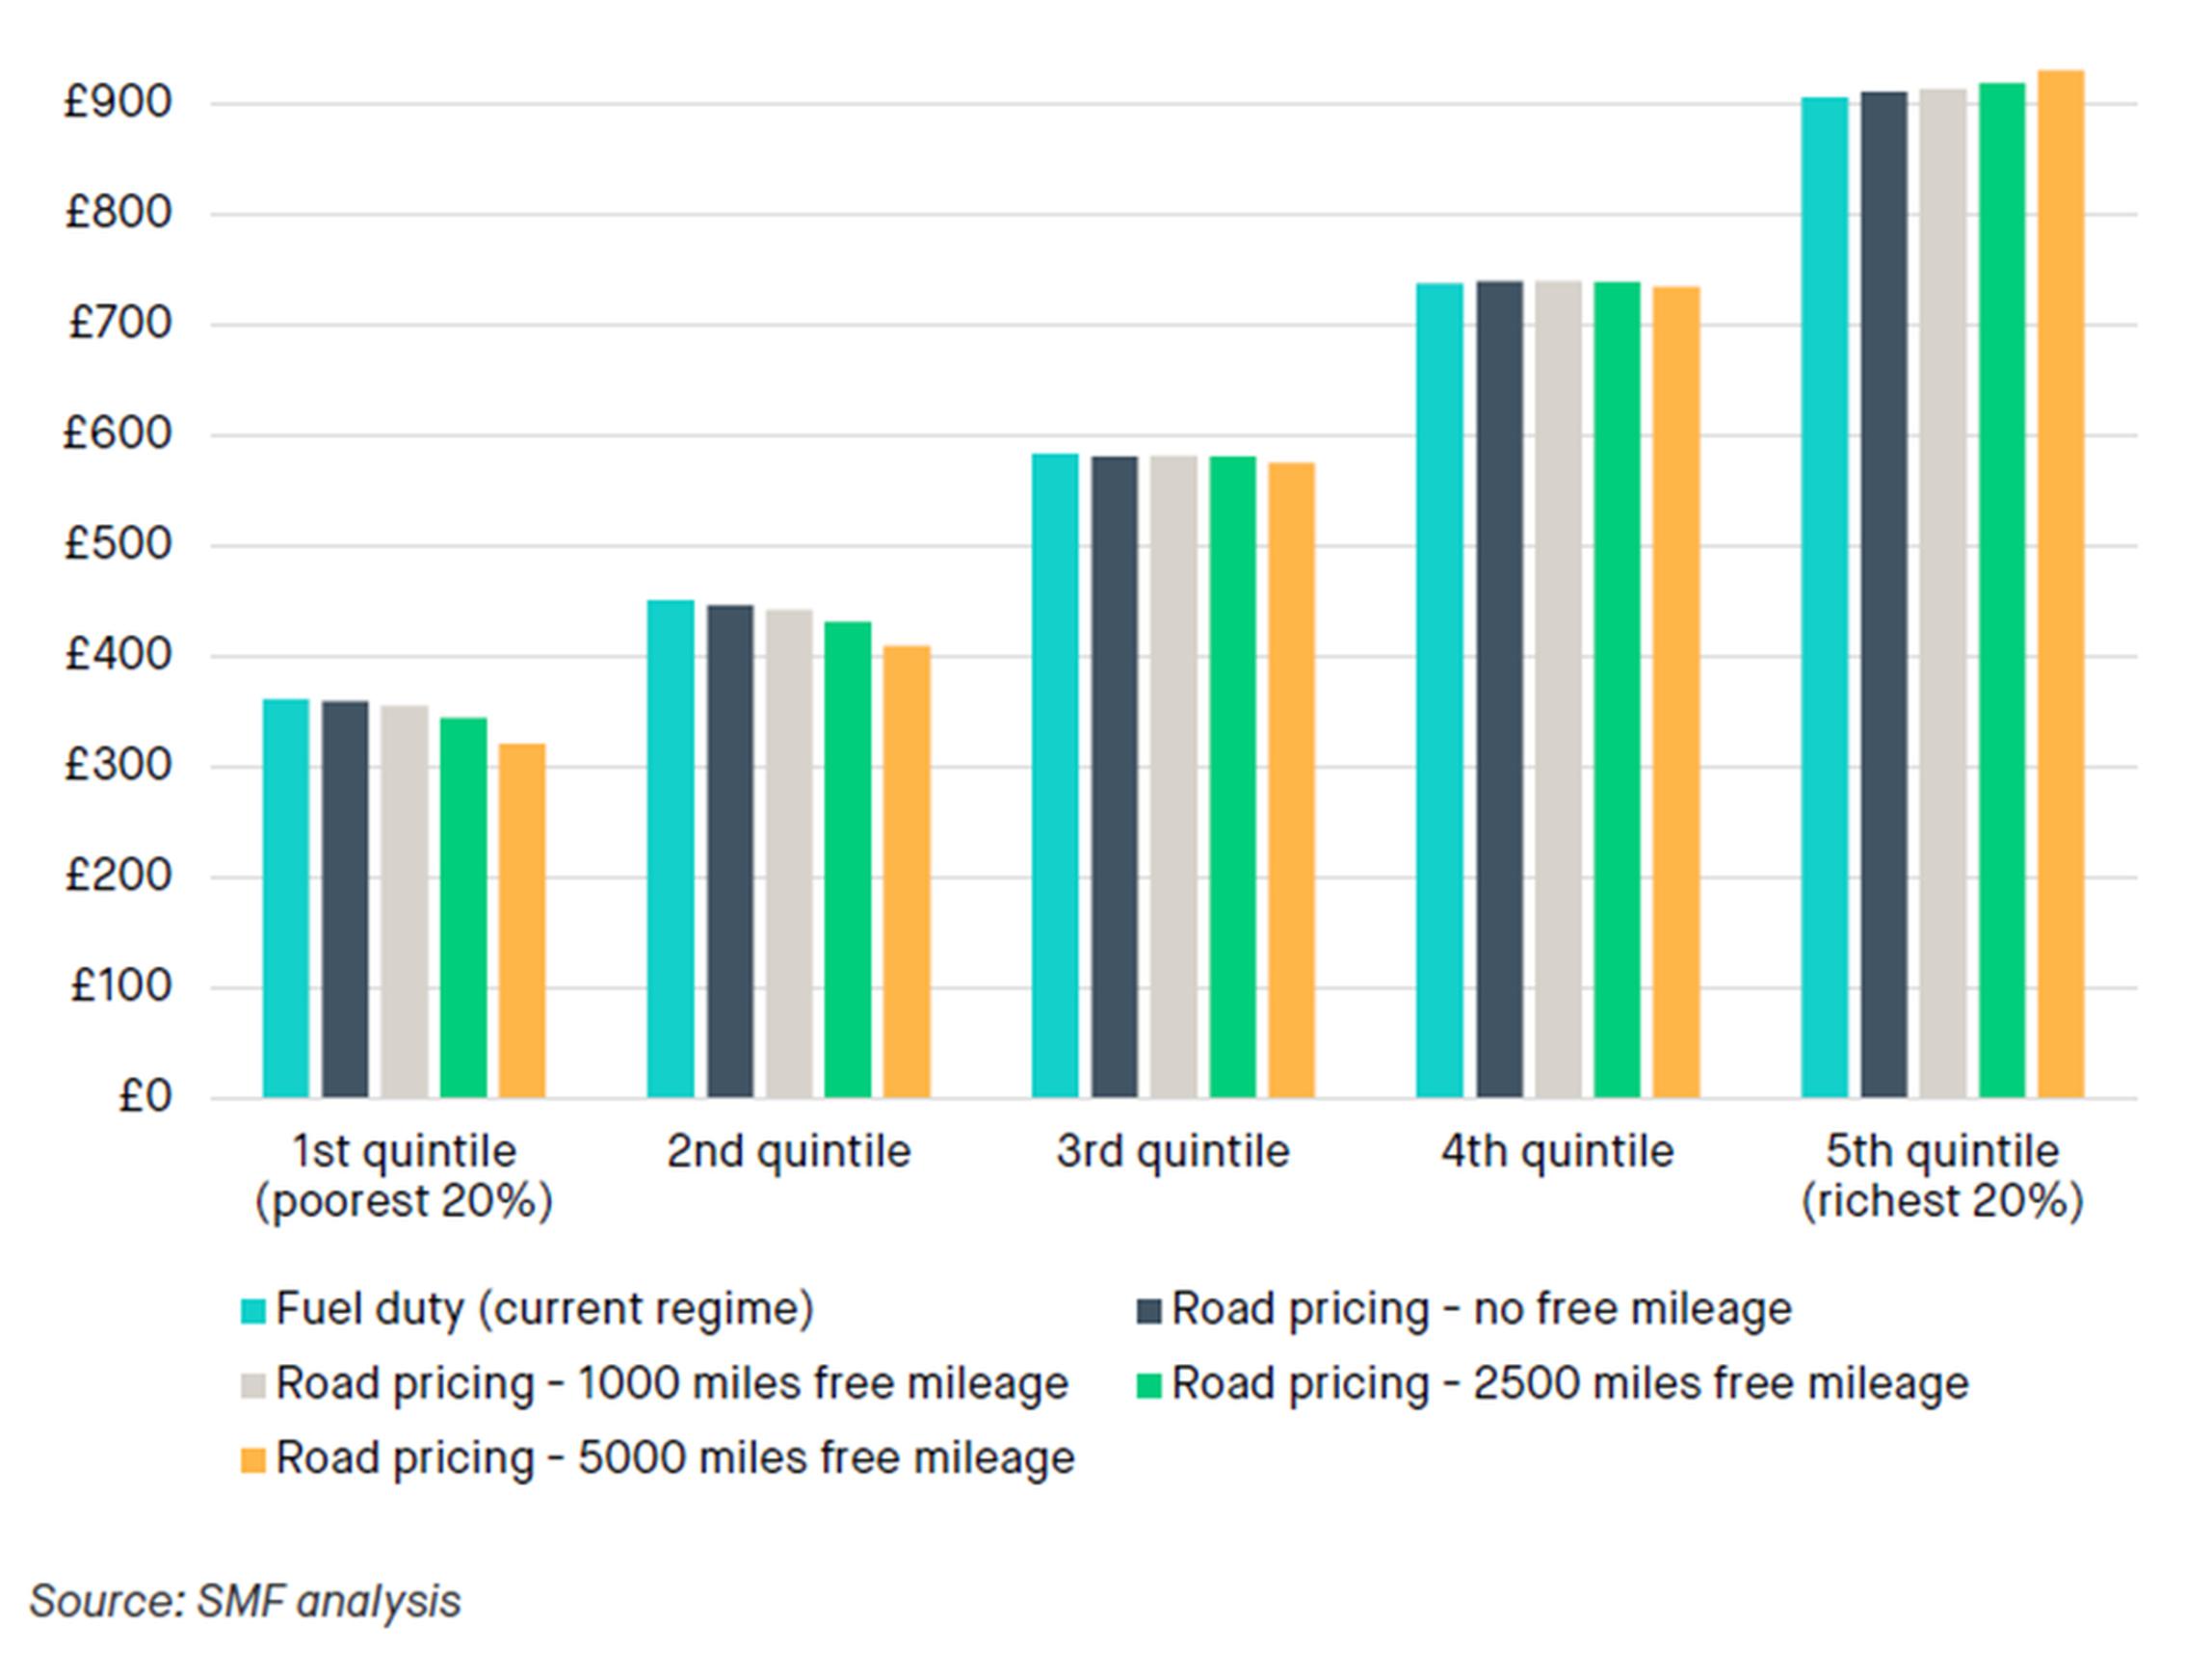 Mean fuel duty costs versus mean road pricing costs for a range of scenarios, vehicle-owning households. Per-mile road charge set at a rate that raises the same amount of revenue as fuel duty does at present. Free mileage is on a per vehicle basis. Modelling the distributional impact of road pricing: Social Market Foundation modelling shown in Chart 1 shows that a road pricing regime with a uniform per mile charge and a free mileage allowance per vehicle would be slightly financially beneficial to lower income motorists, compared with the current fuel duty regime. For example, a revenue-neutral regime with a free allowance of 2,500 miles would leave motorist households in the bottom two income quintiles about £20 per year better off than the current fuel duty regime. This amounting to about £92m in aggregate. This rises to about £40 per year with a free allowance of 5,000 miles - £188m in aggregate.